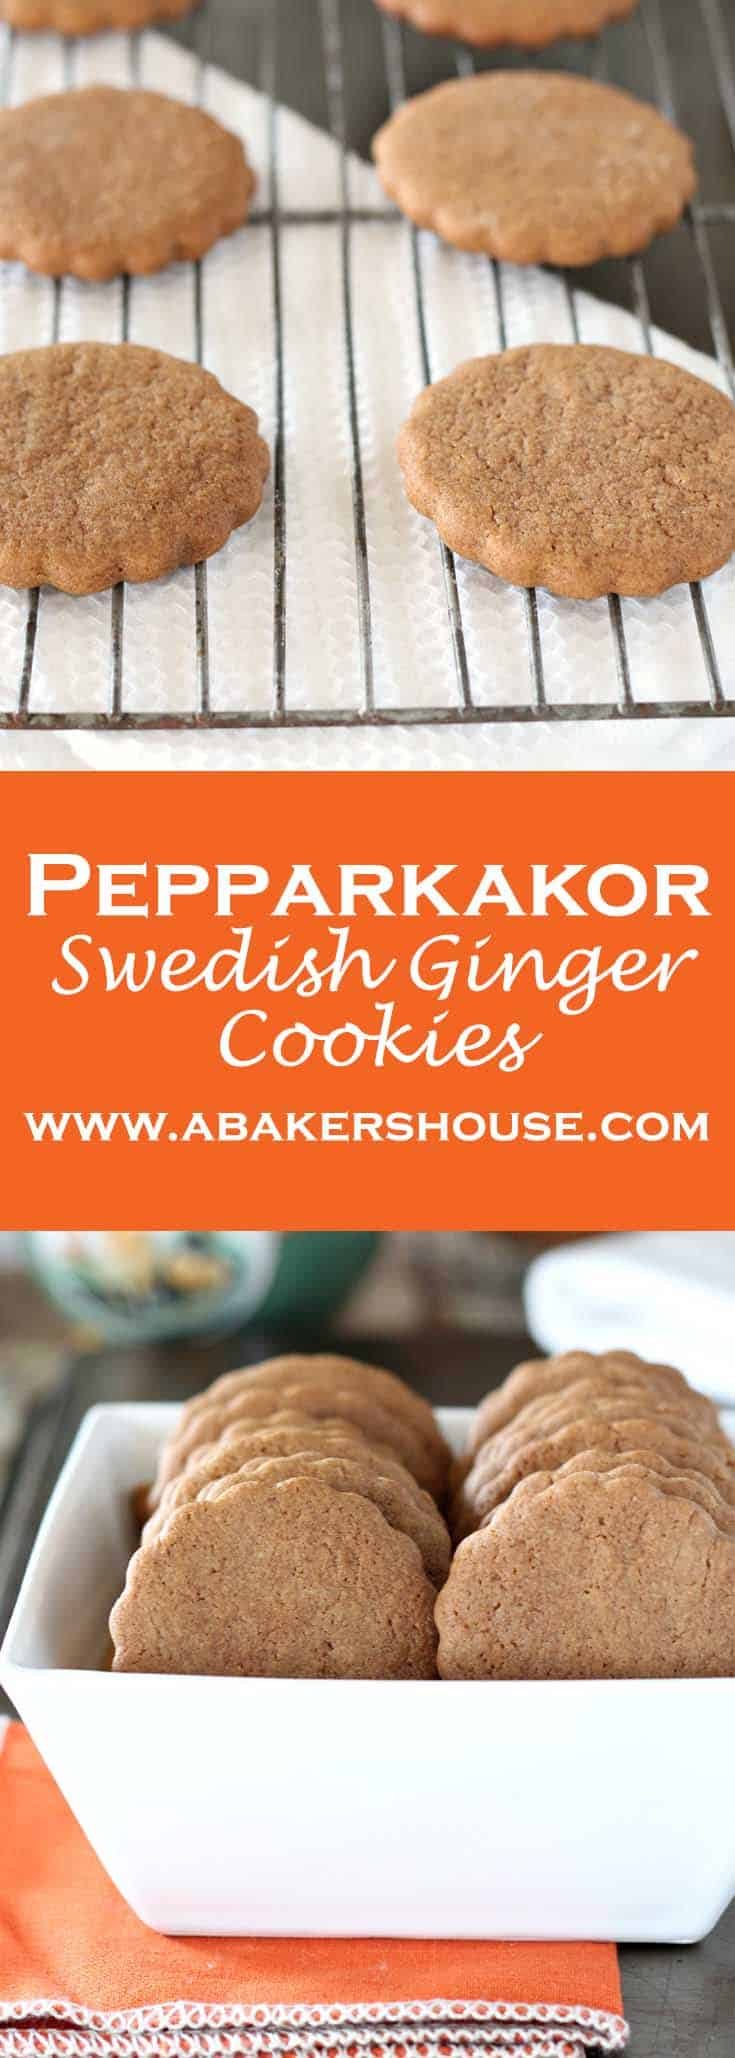 The Best Swedish Ginger Cookies-- Pepparkakor | A Baker's House